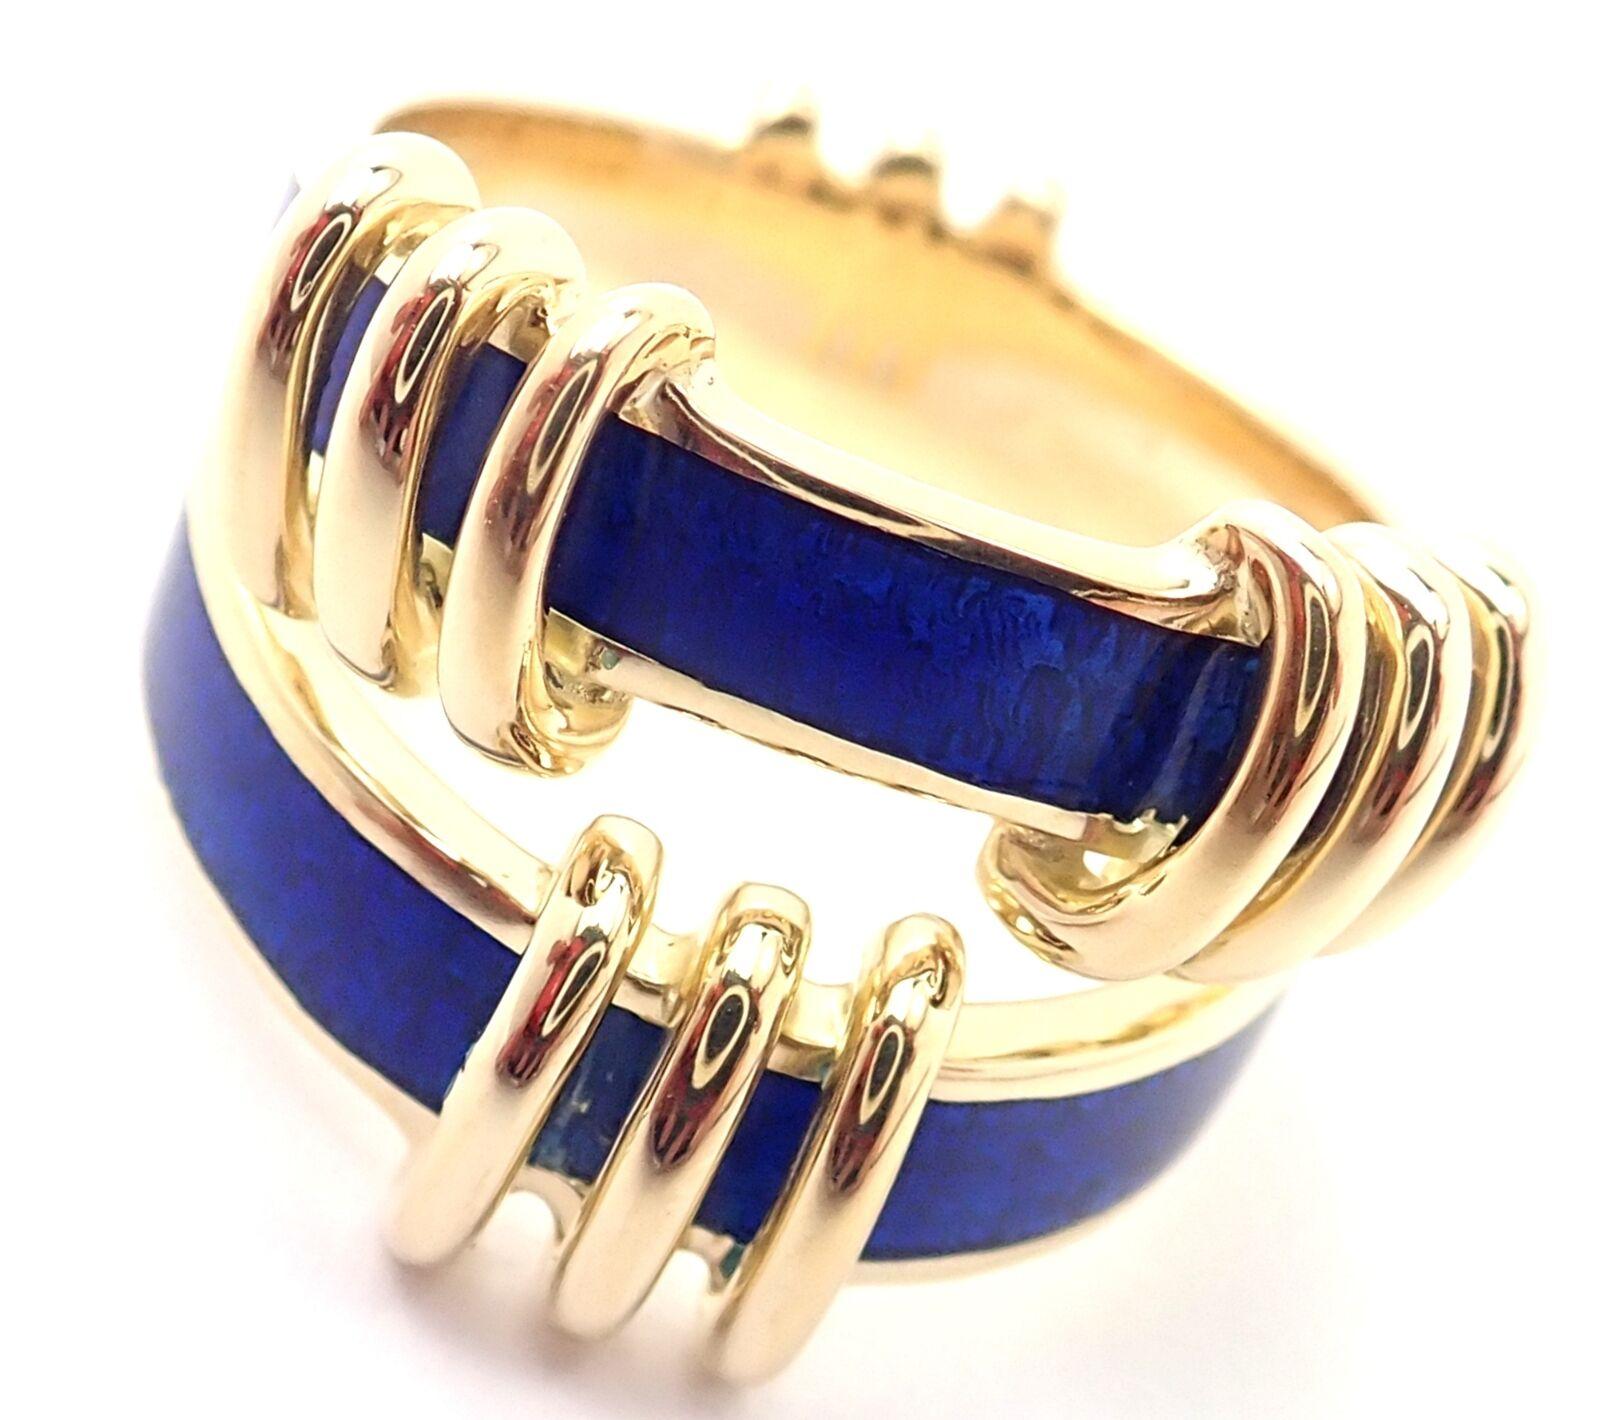 Tiffany & Co. Jean Schlumberger Blue Enamel Yellow Gold Band Ring 1